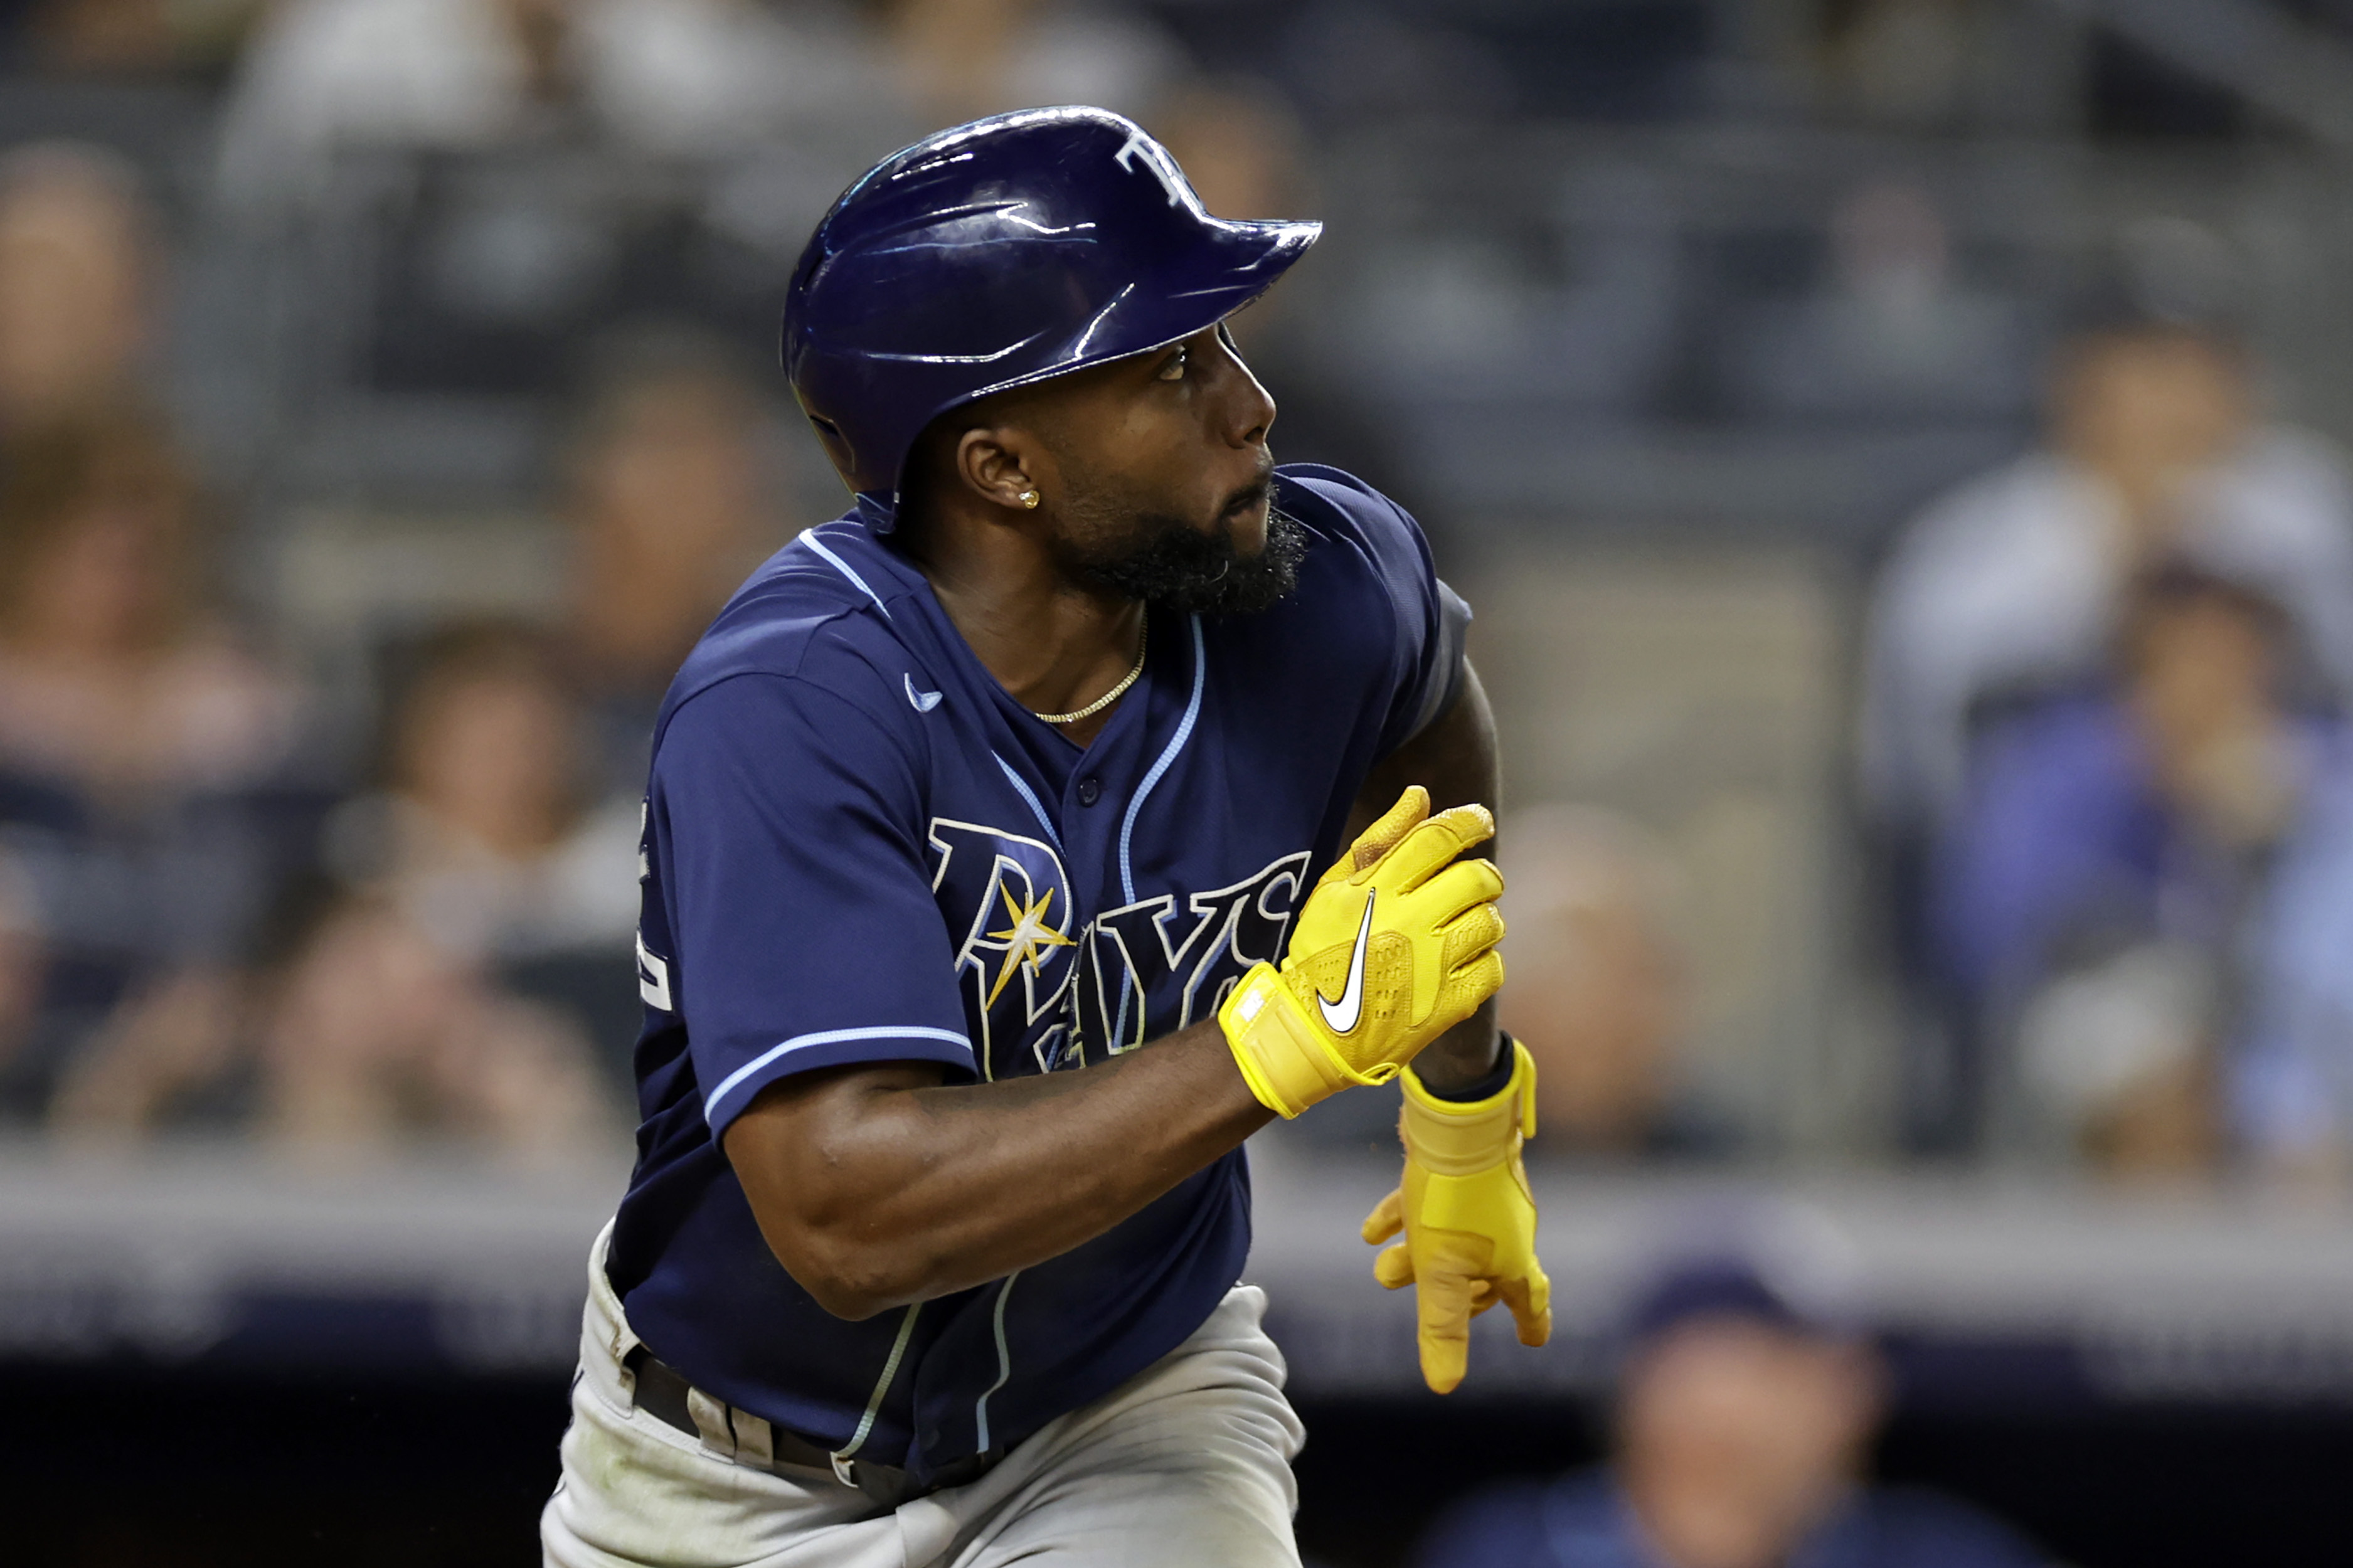 Randy Arozarena says issue with Yandy Díaz is resolved